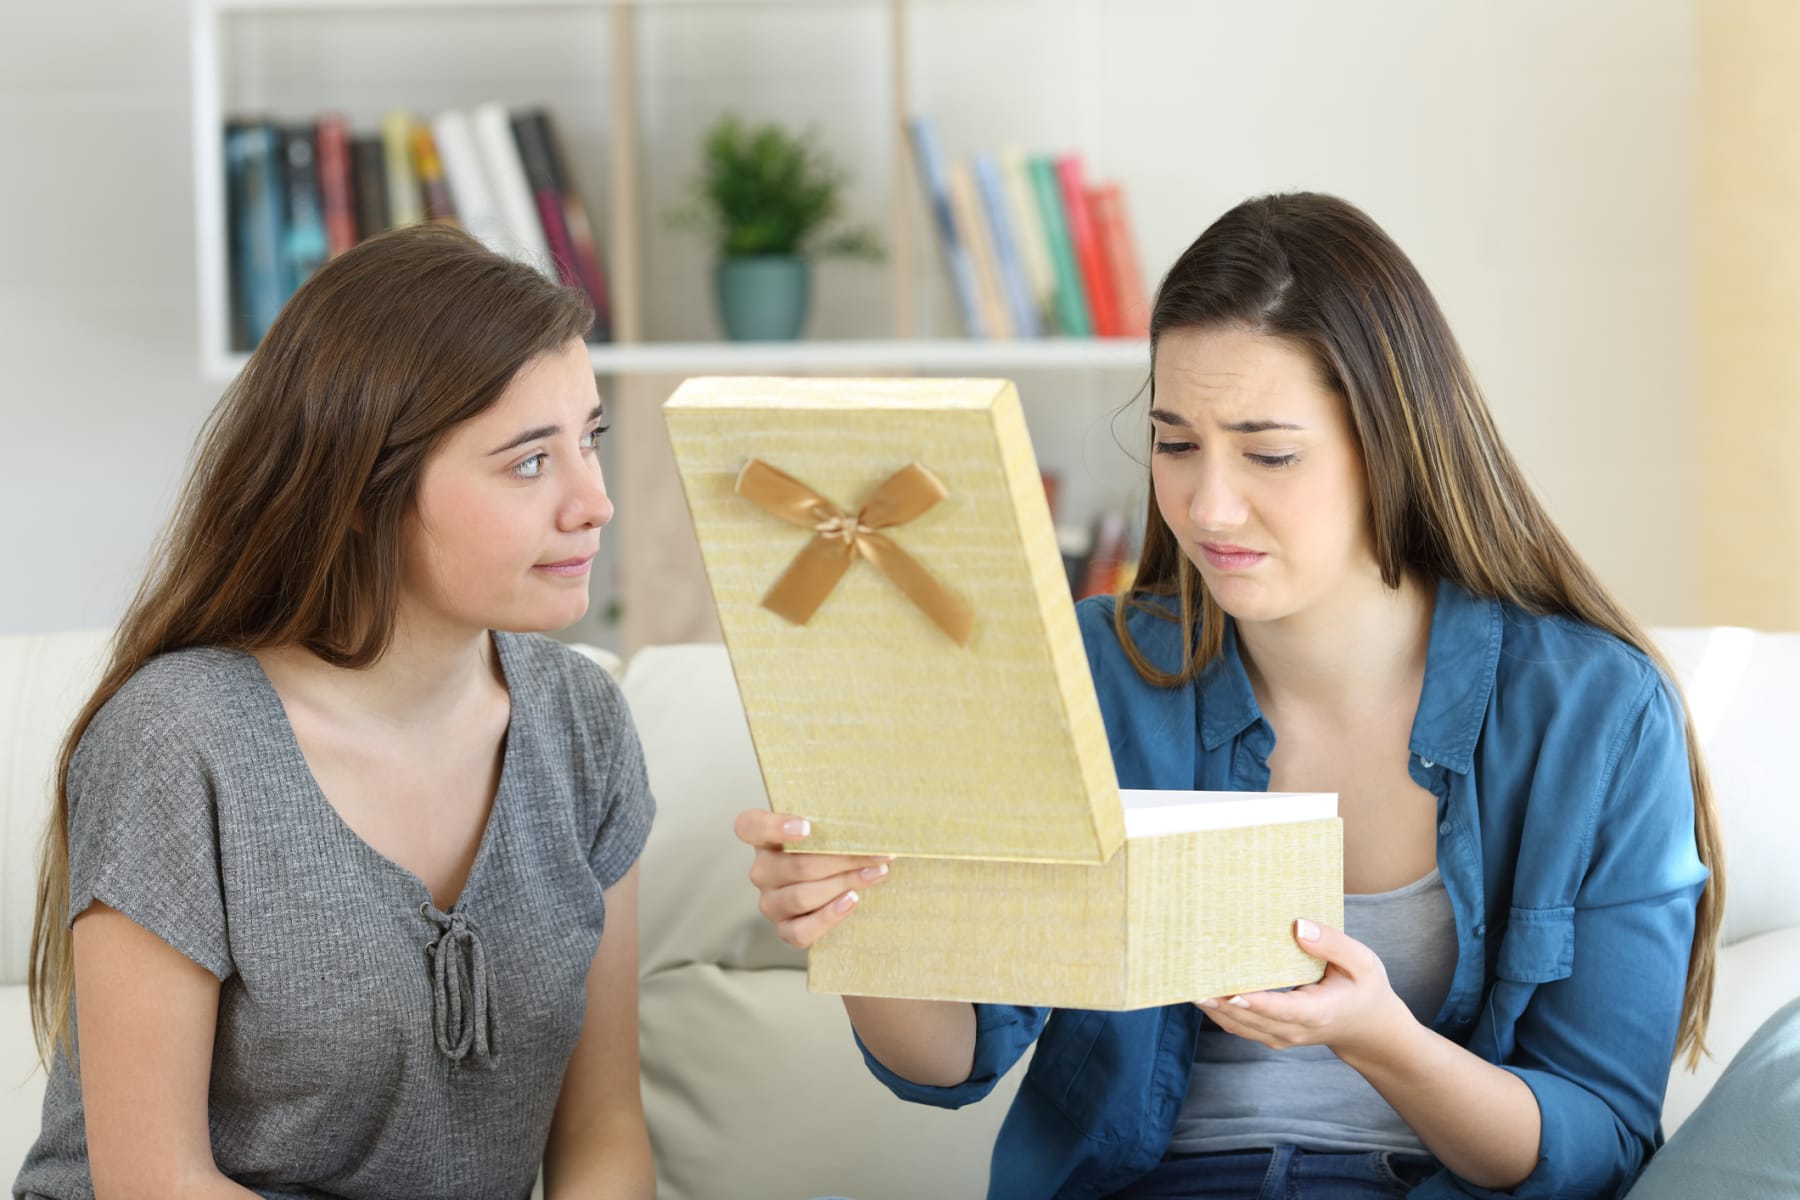 Two women open a gift and look displeased.